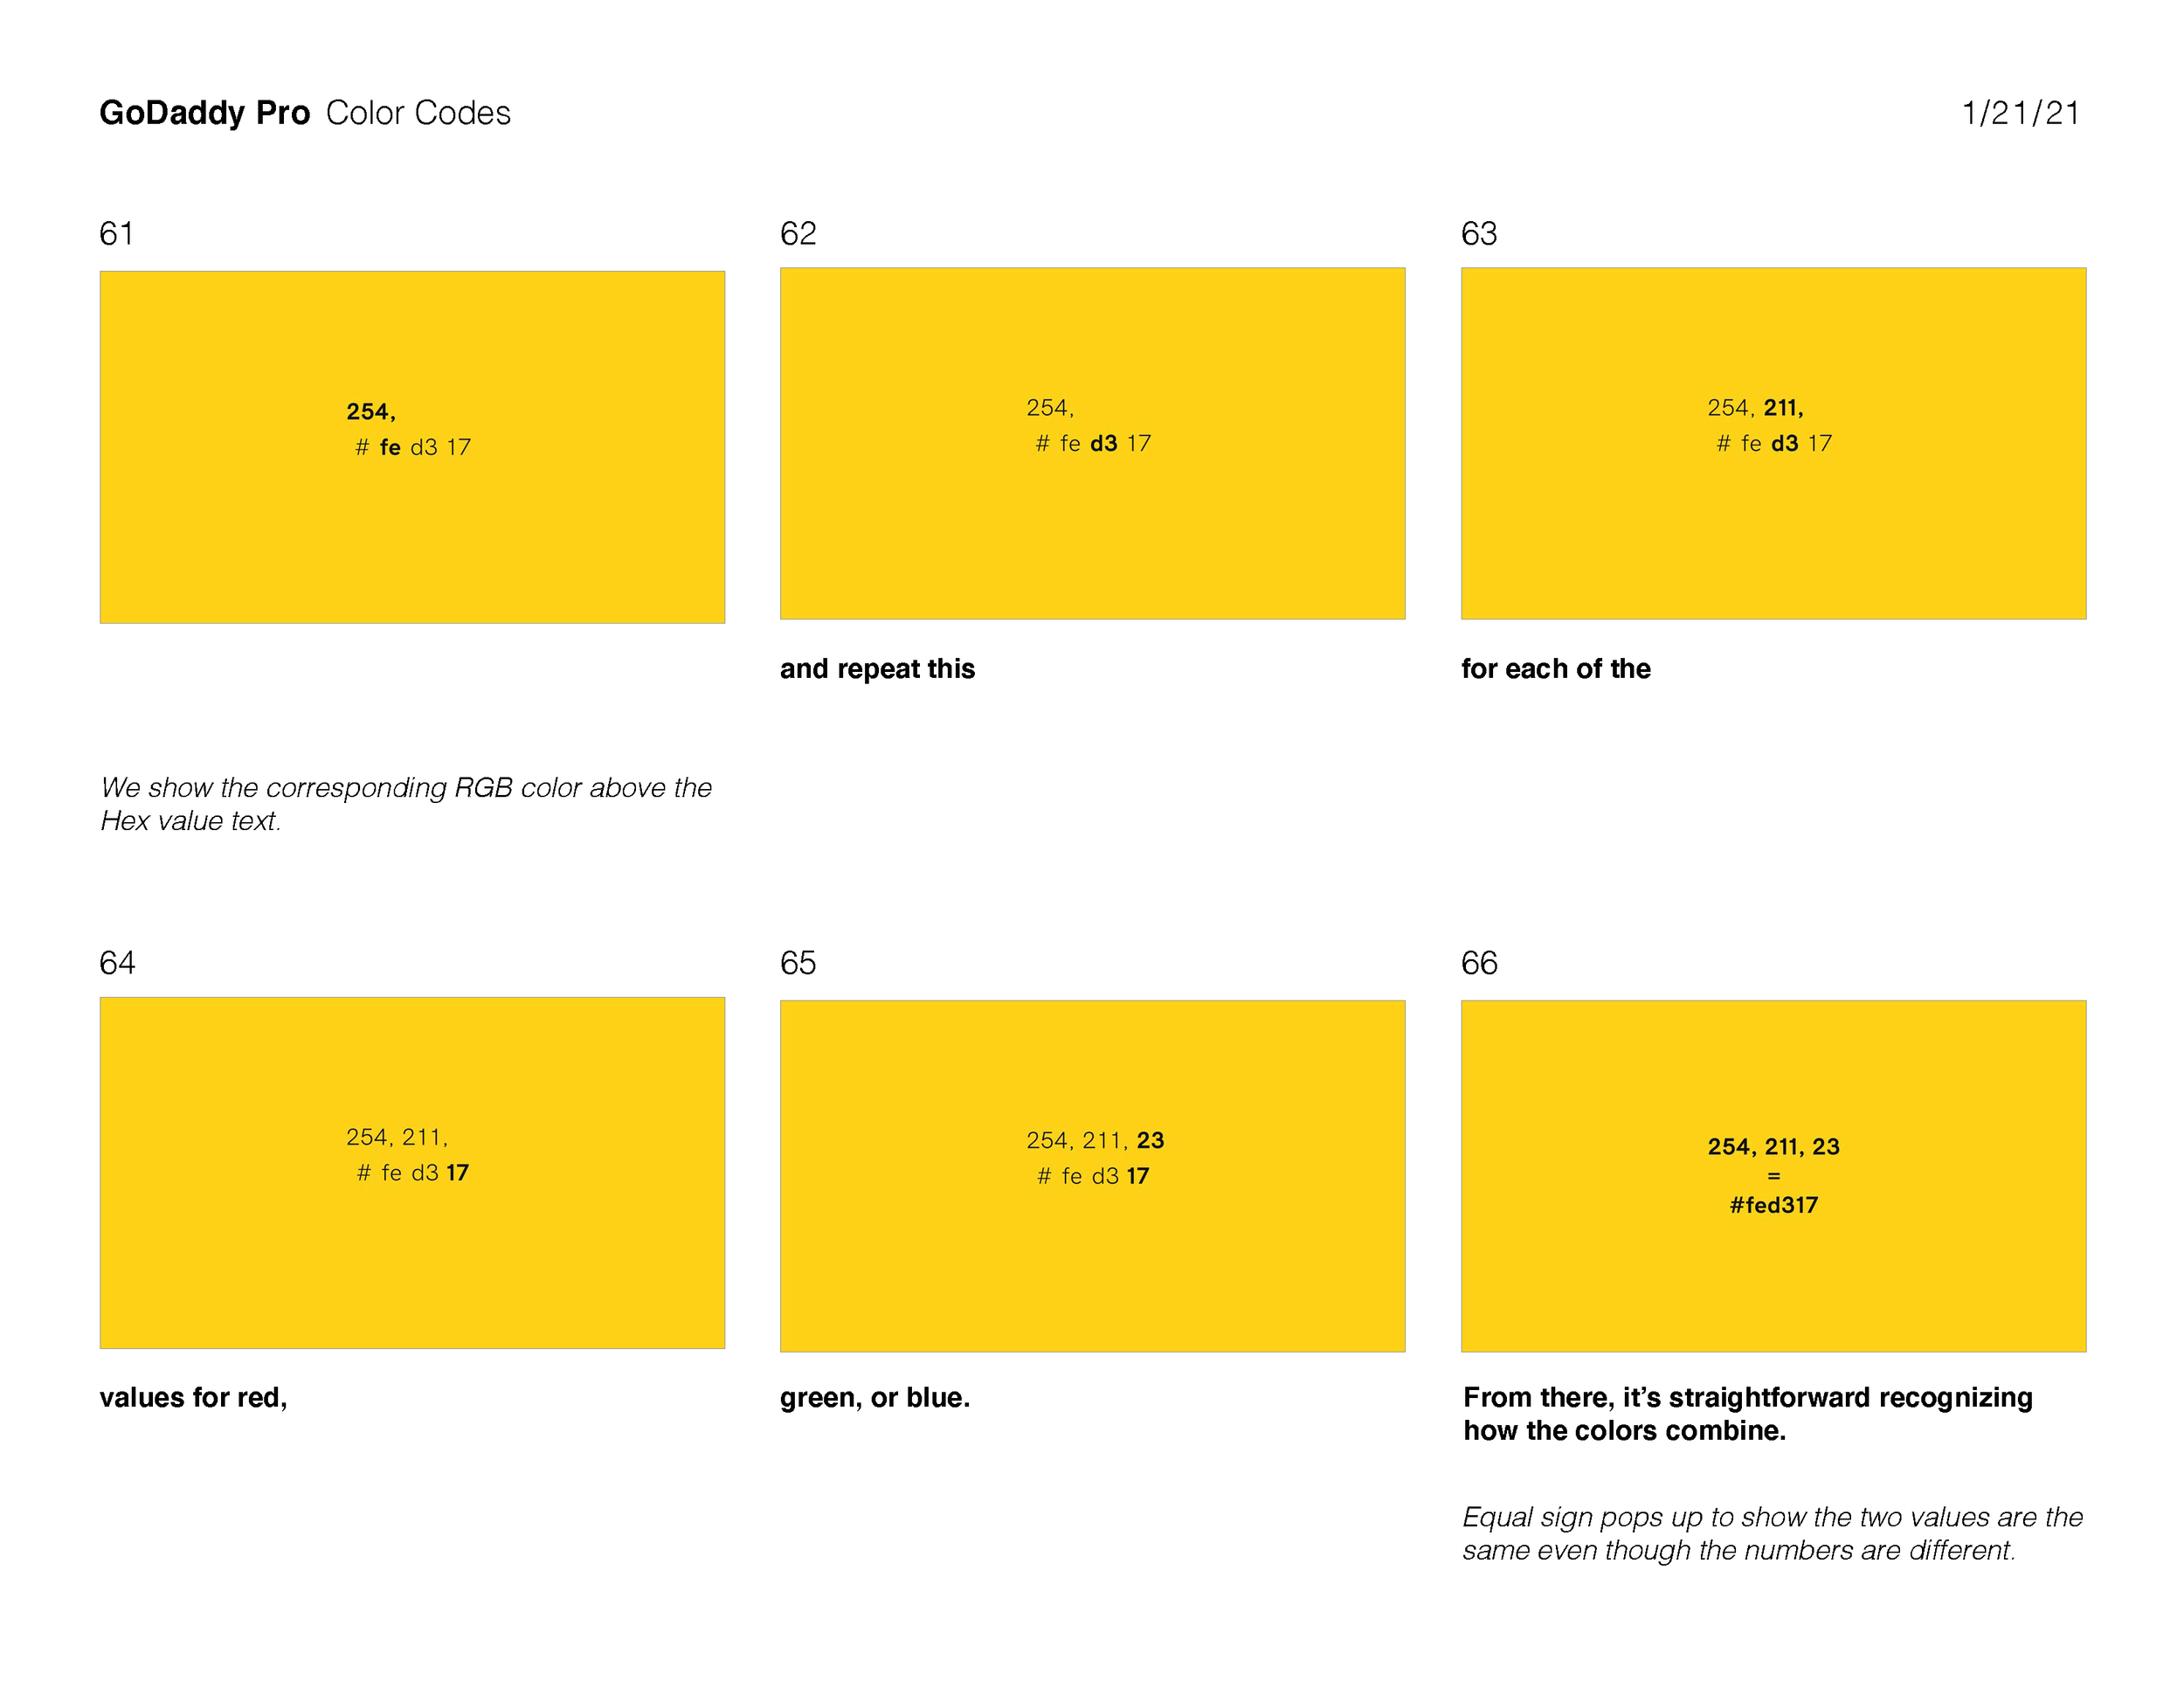 GDP_ColorCodesStoryboard_1.21.21_Page_11.png